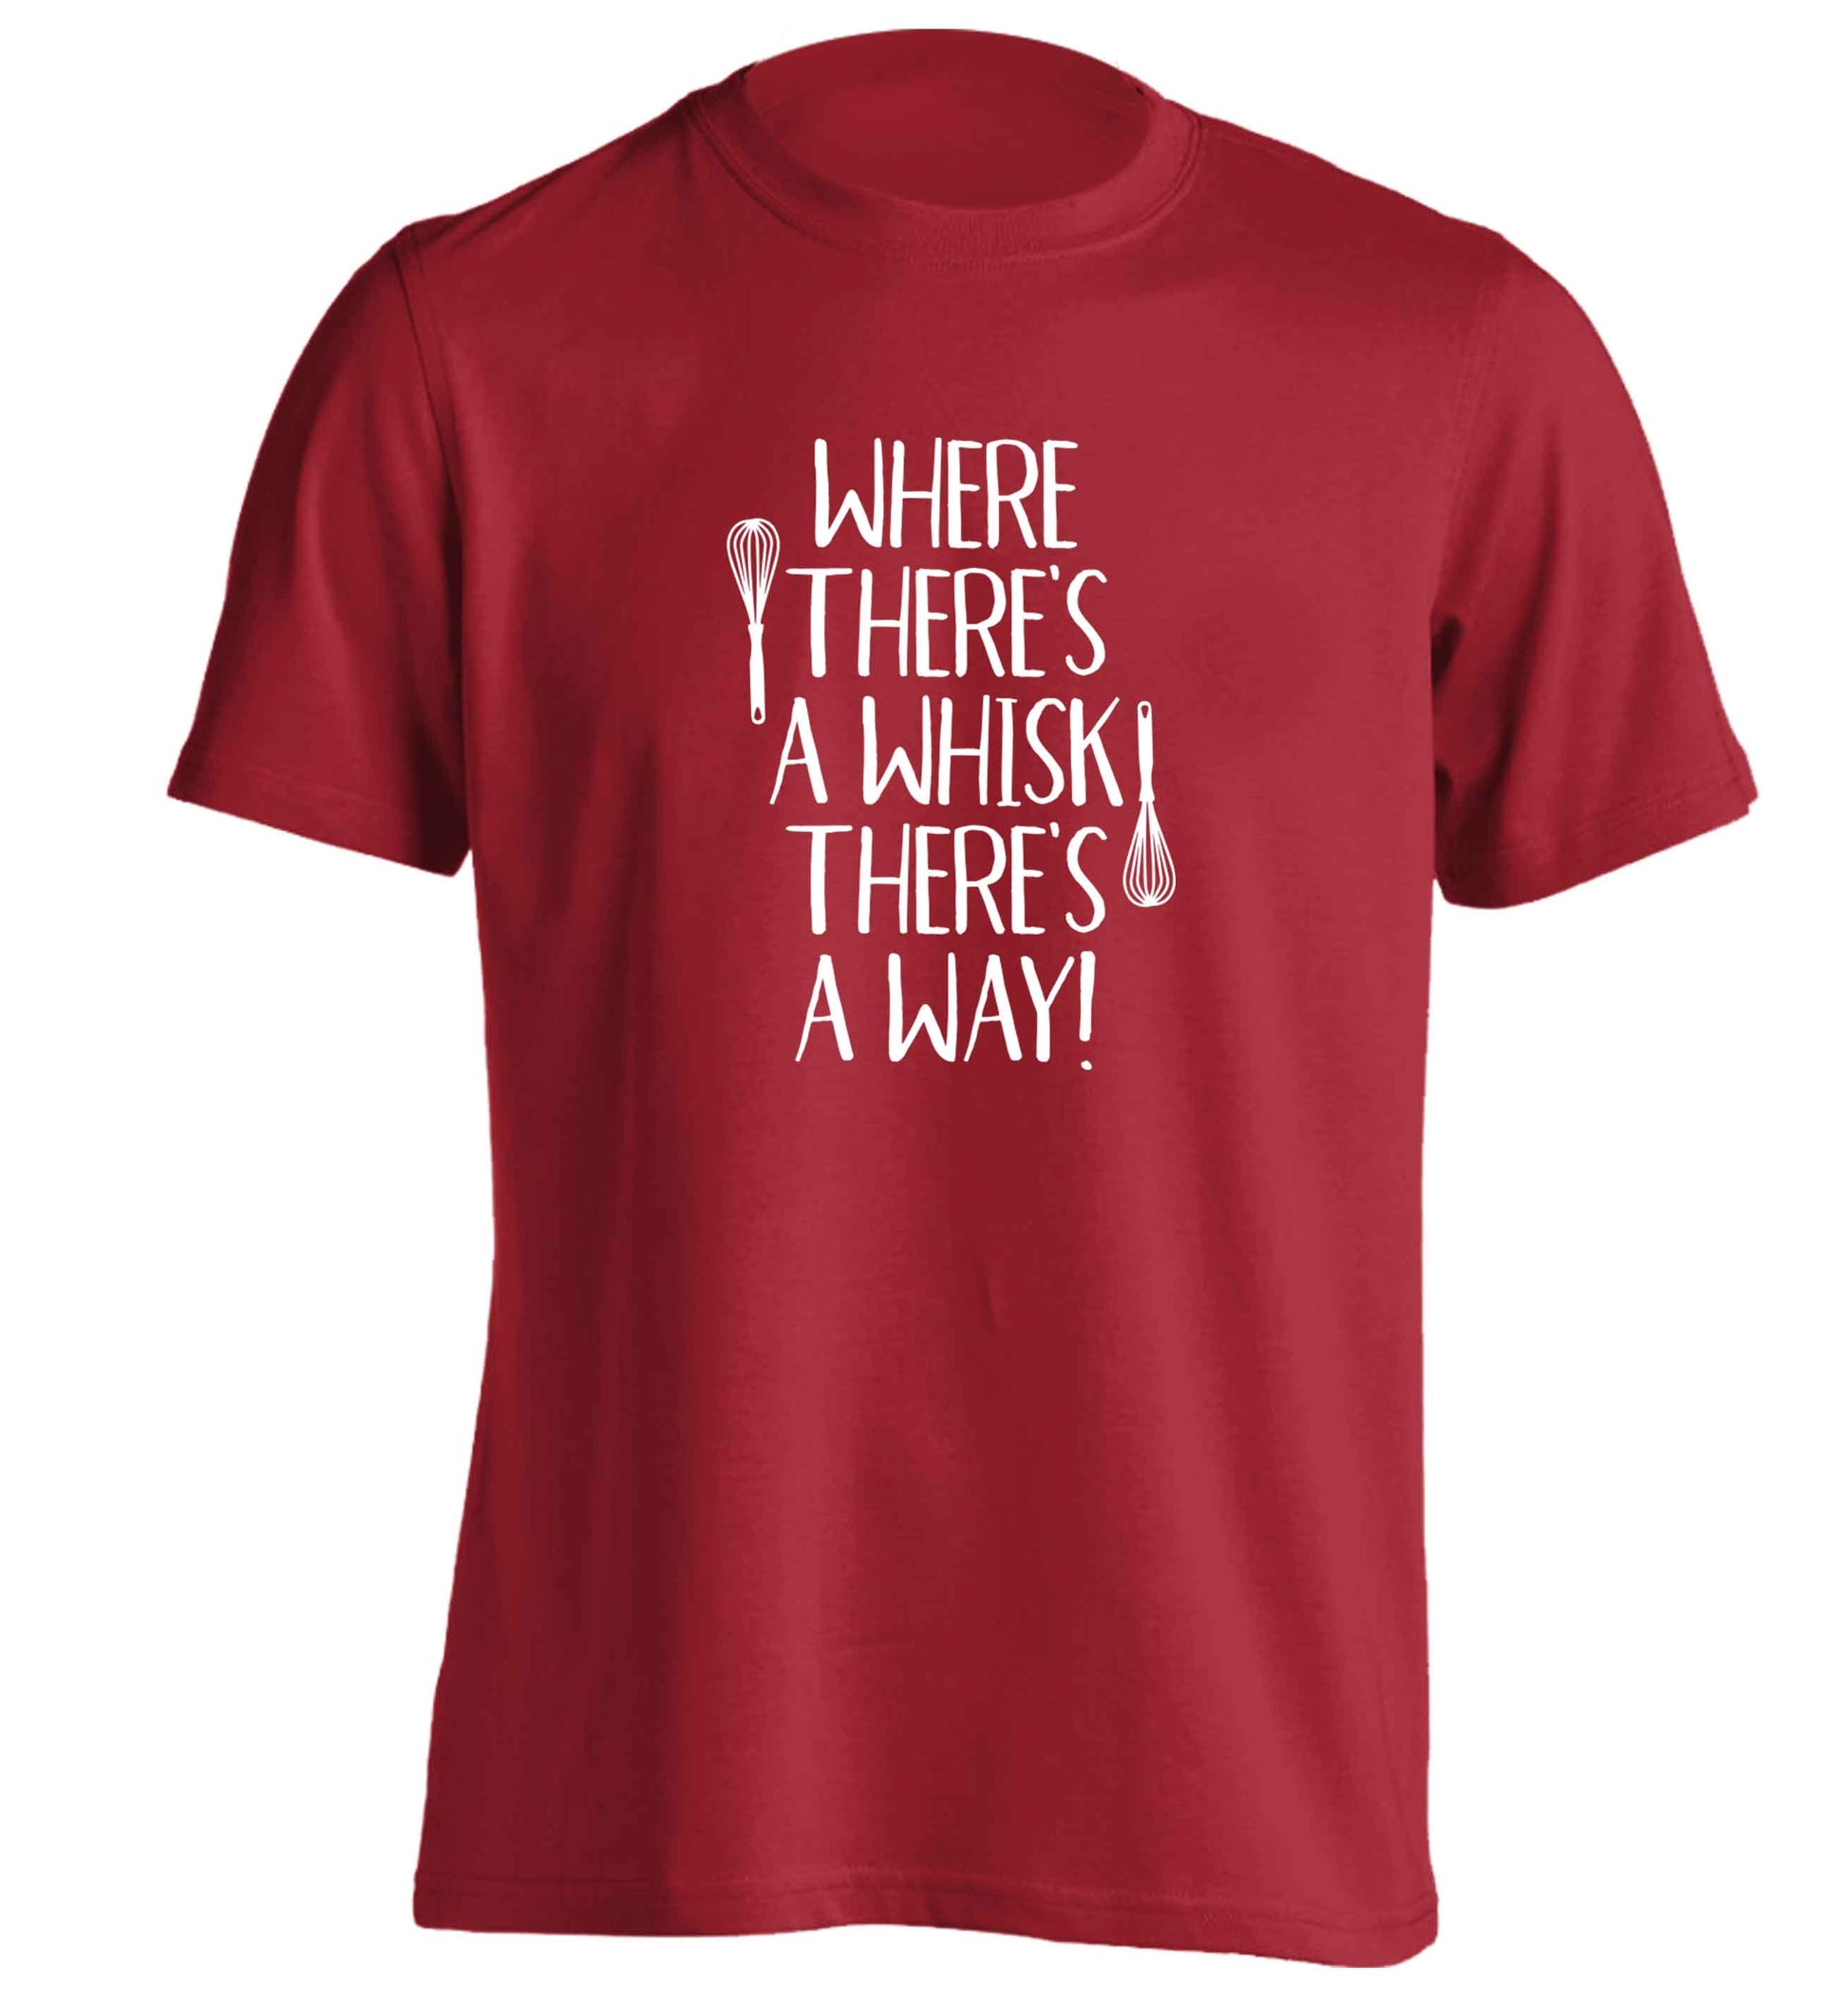 Where there's a whisk there's a way adults unisex red Tshirt 2XL